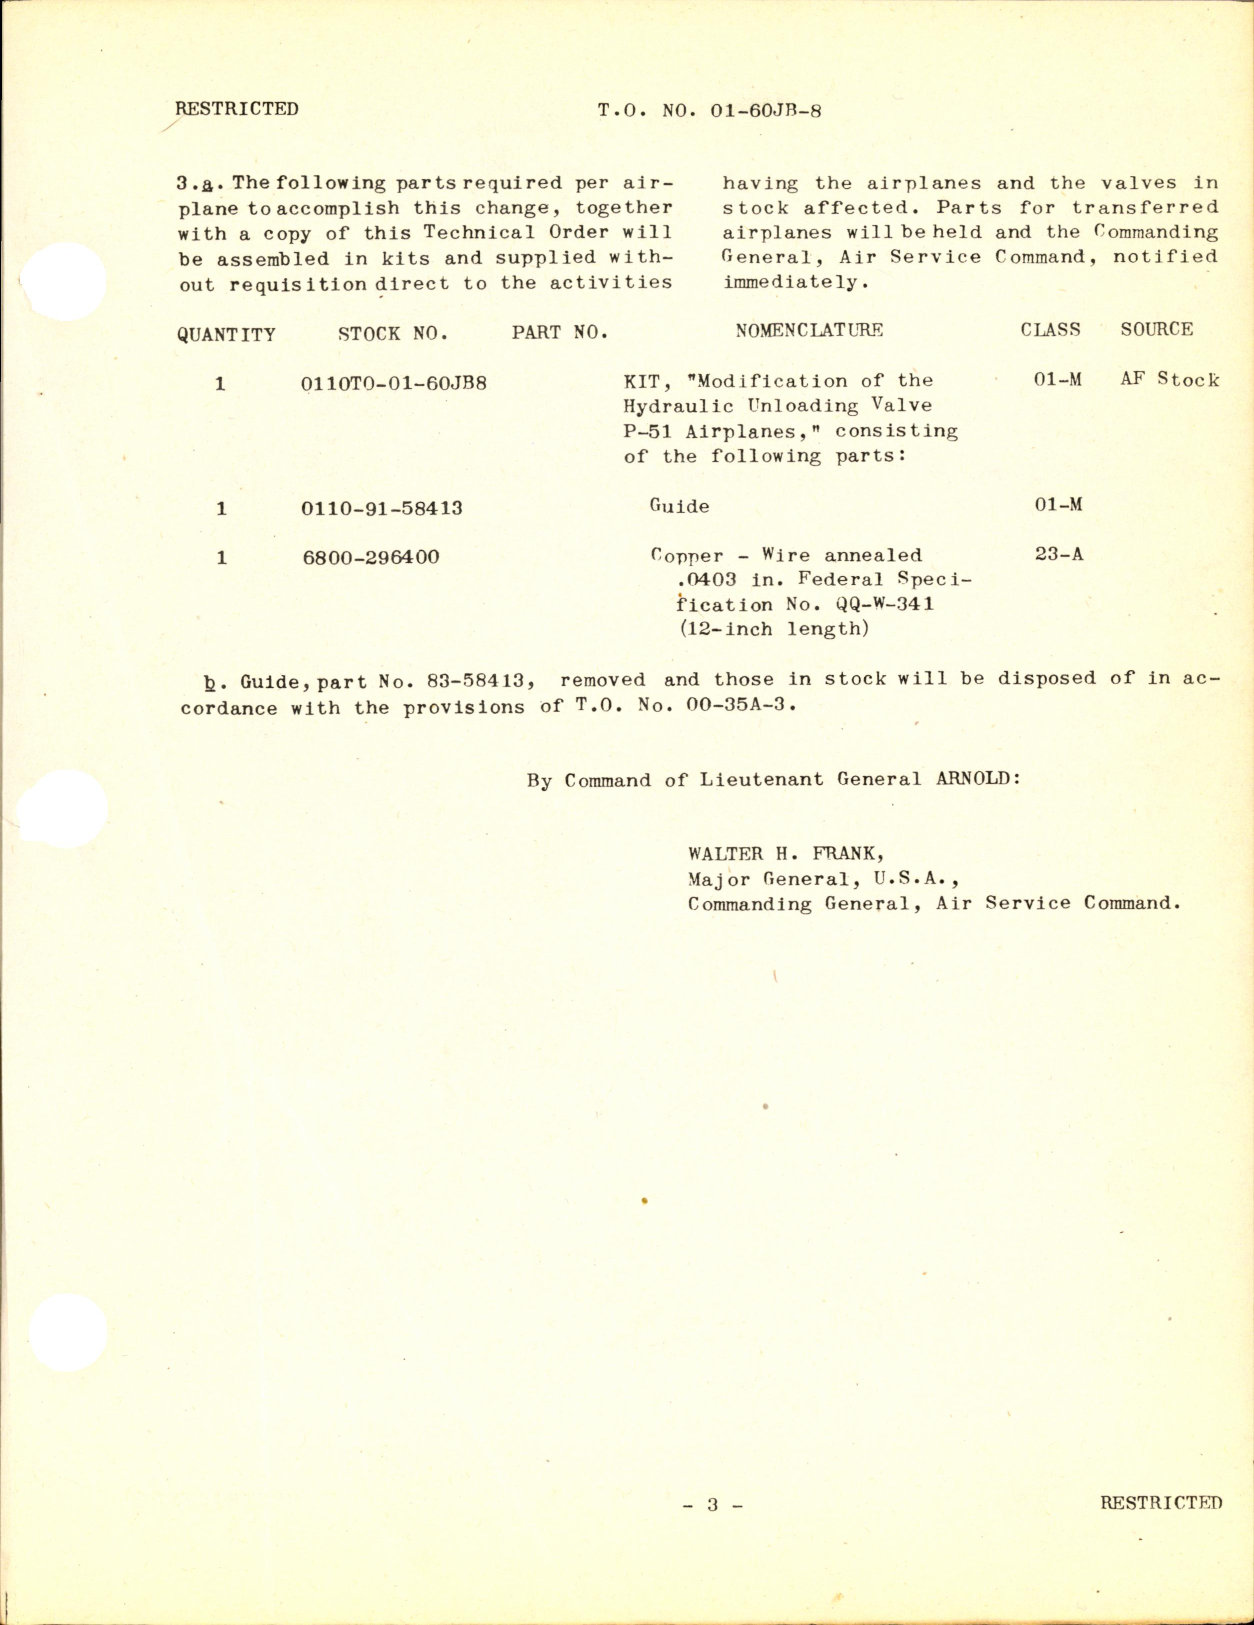 Sample page 3 from AirCorps Library document: Rework of Hydraulic Unloading Valve in the P-51